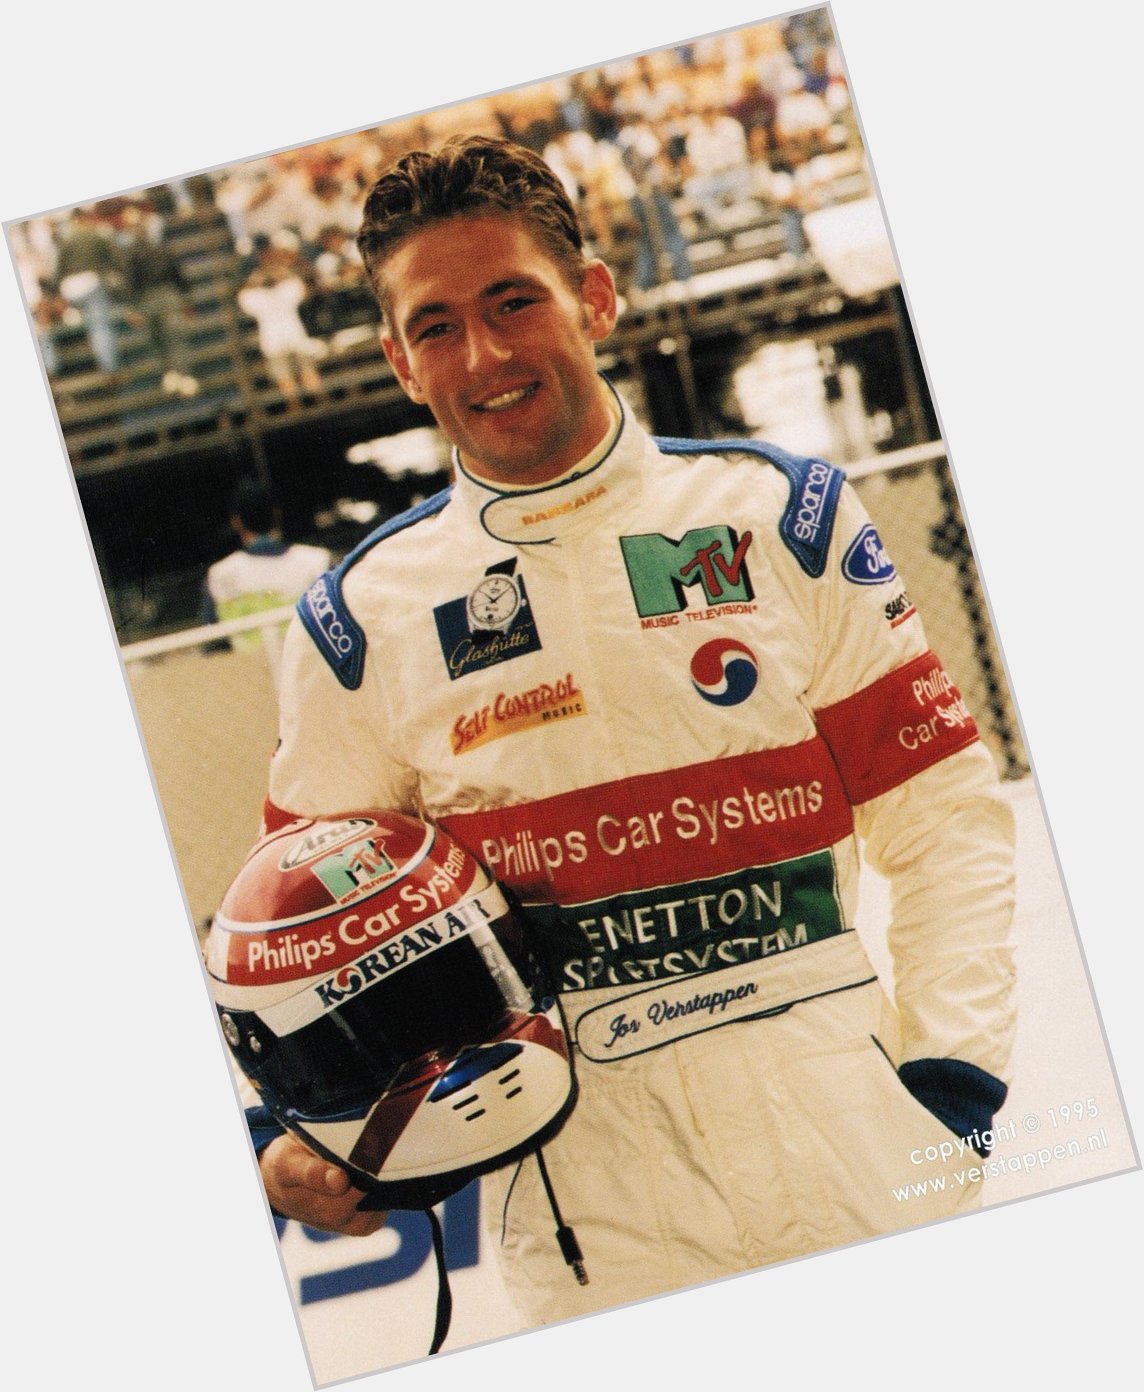 Happy birthday to Jos Verstappen! Five races for Simtek, three retirements, one 12th place and a DNS. Glorious 